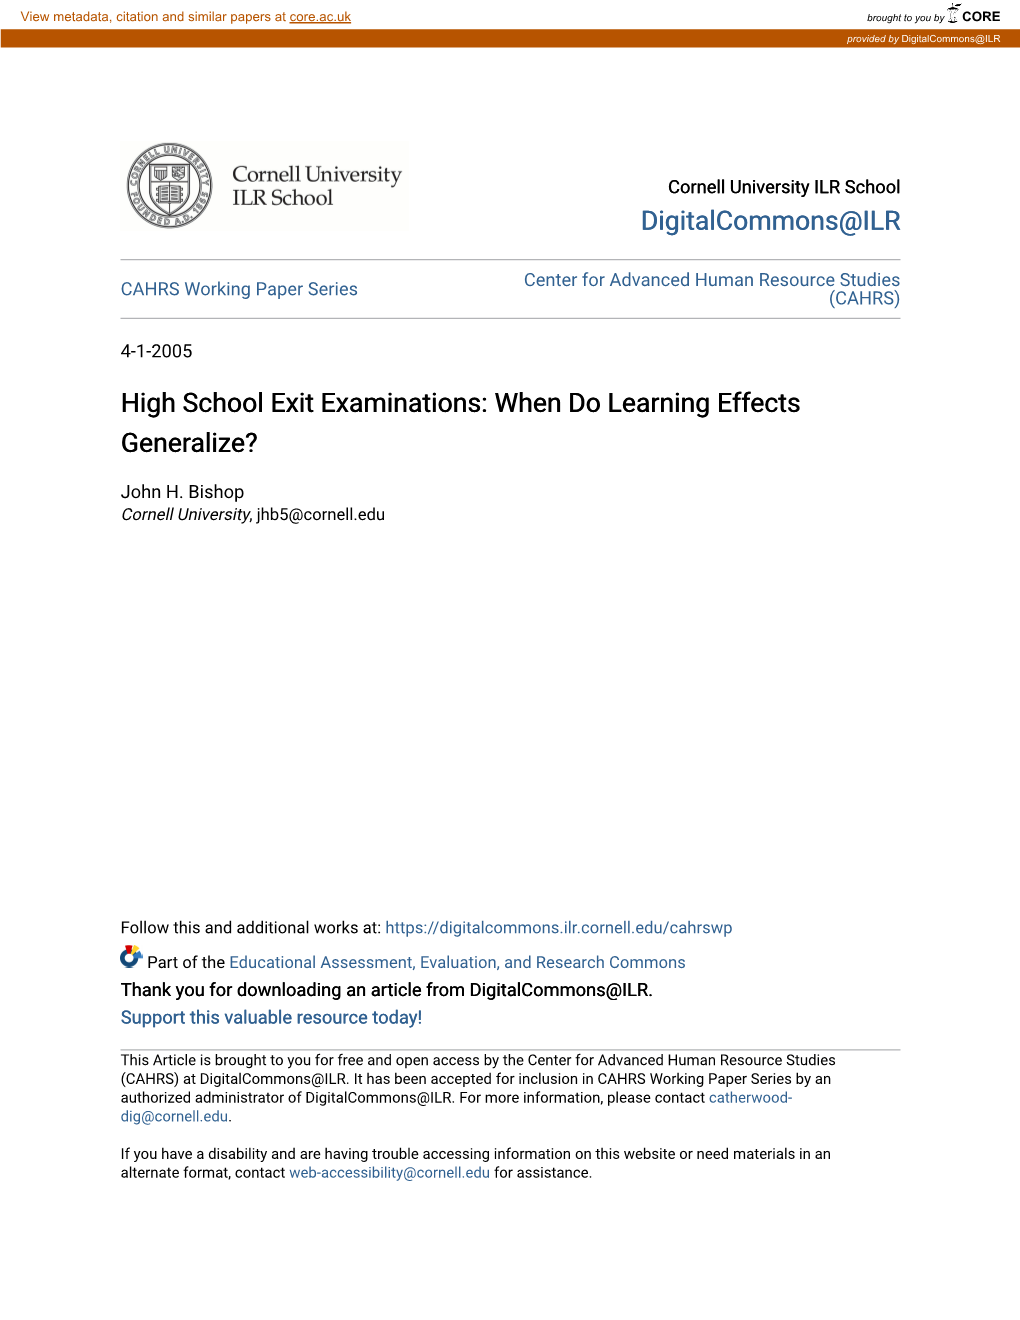 High School Exit Examinations: When Do Learning Effects Generalize?